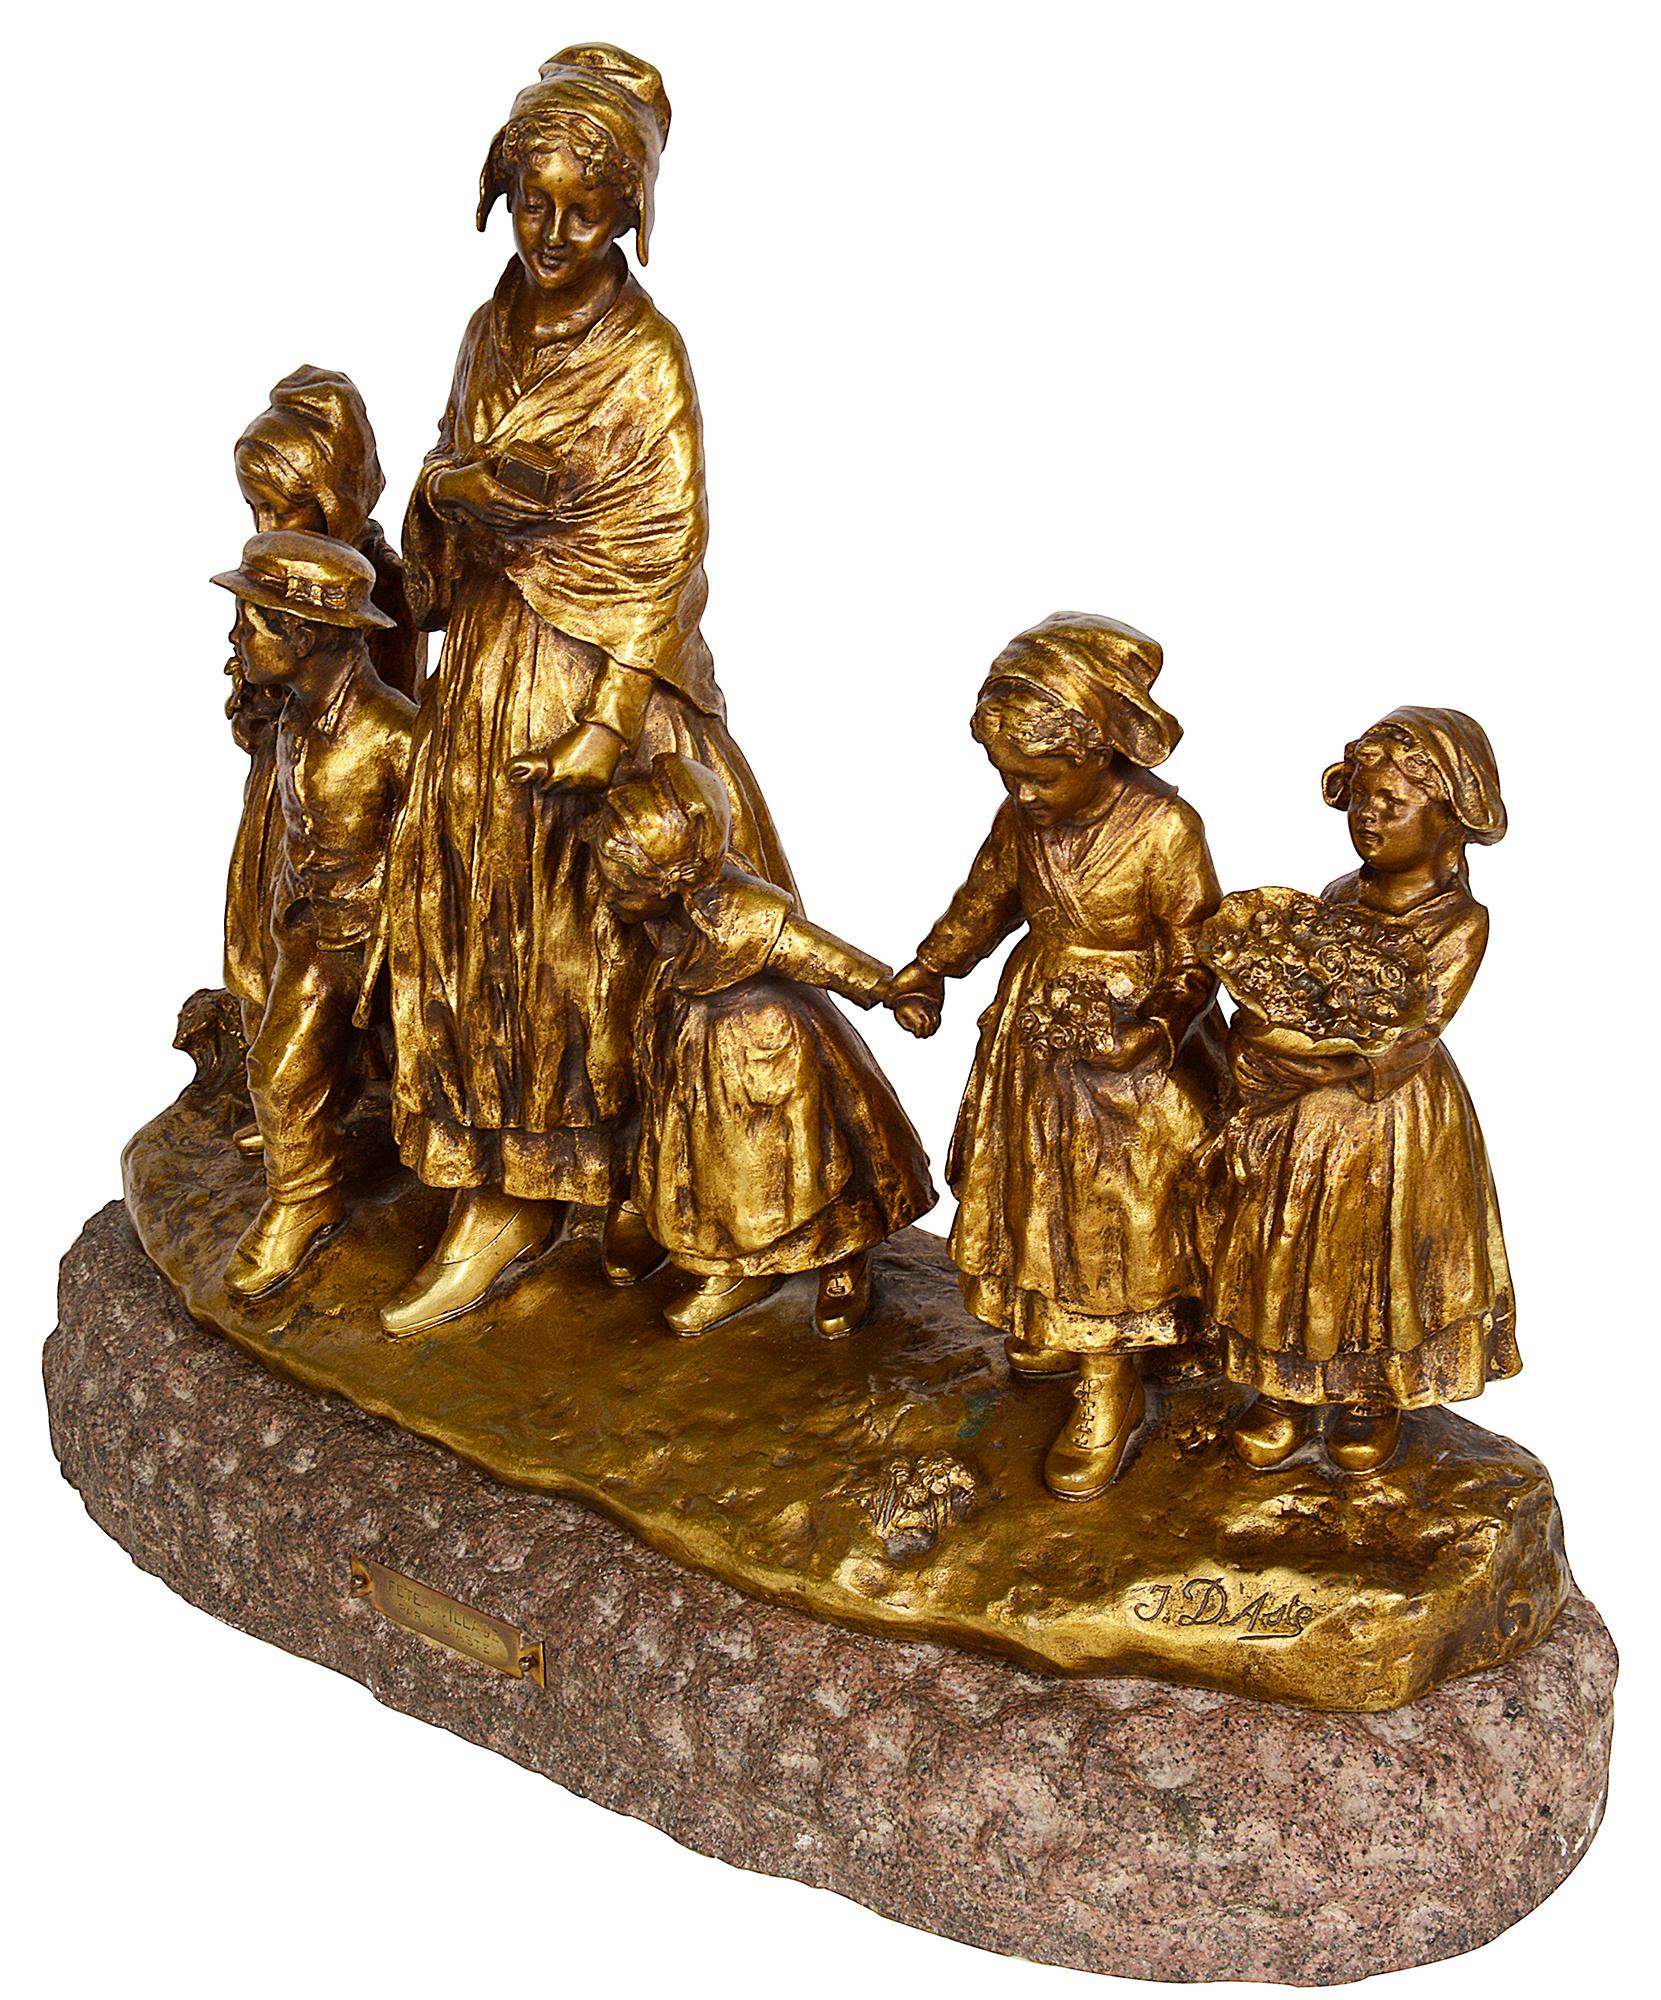 Joseph d'Asté [1881-1945]
Fête au village
Enchanting gilded bronze study of a mother and children holding hands in their way to the village Fete, mounted on a marble base.